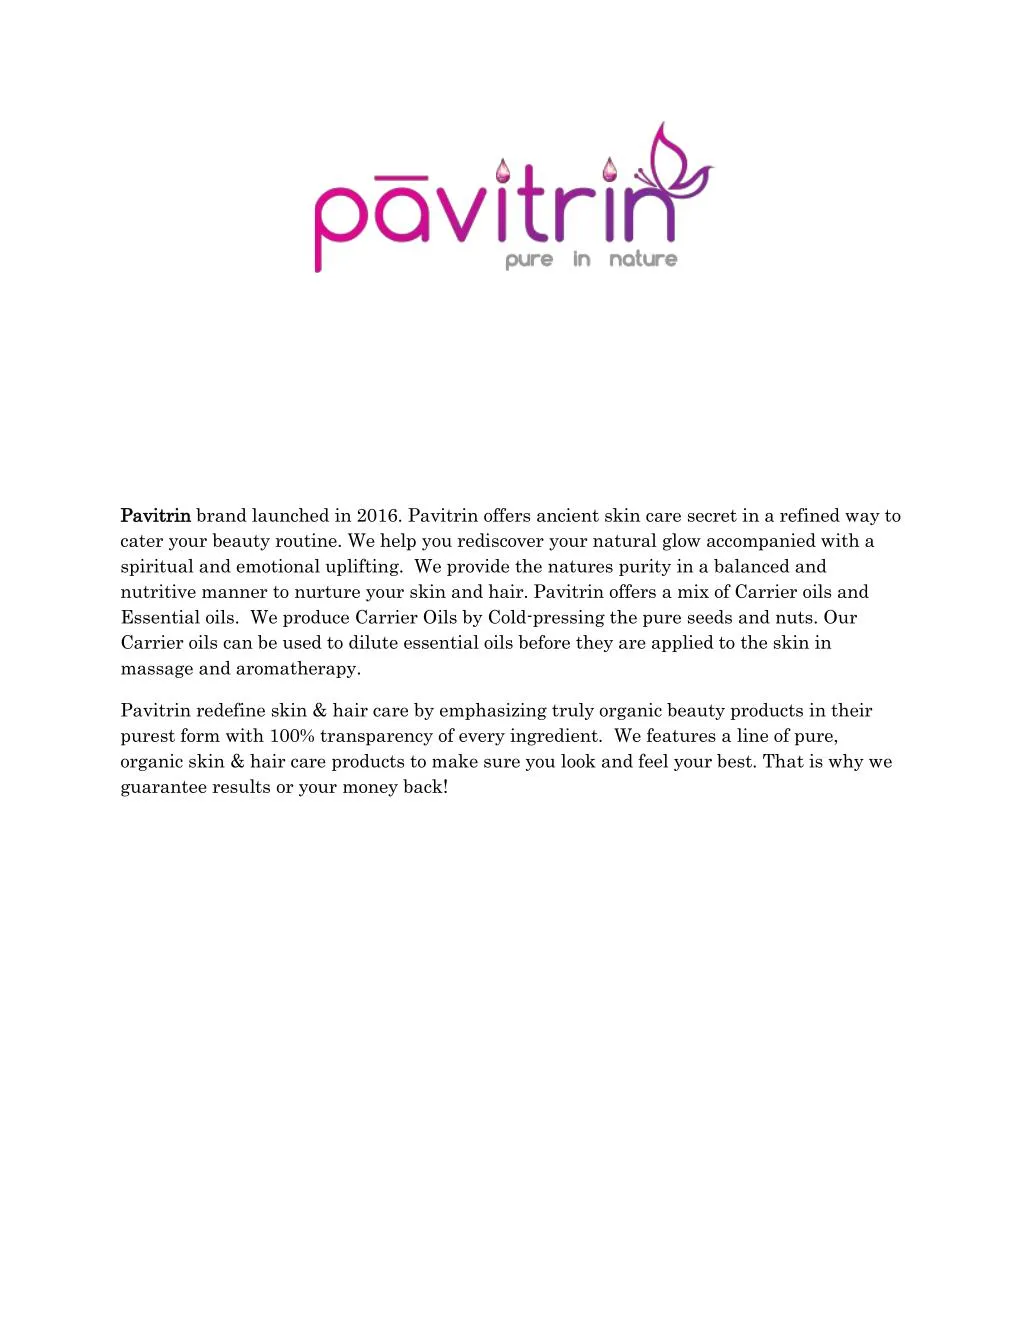 pavitri pavitrin n brand launched in 2016